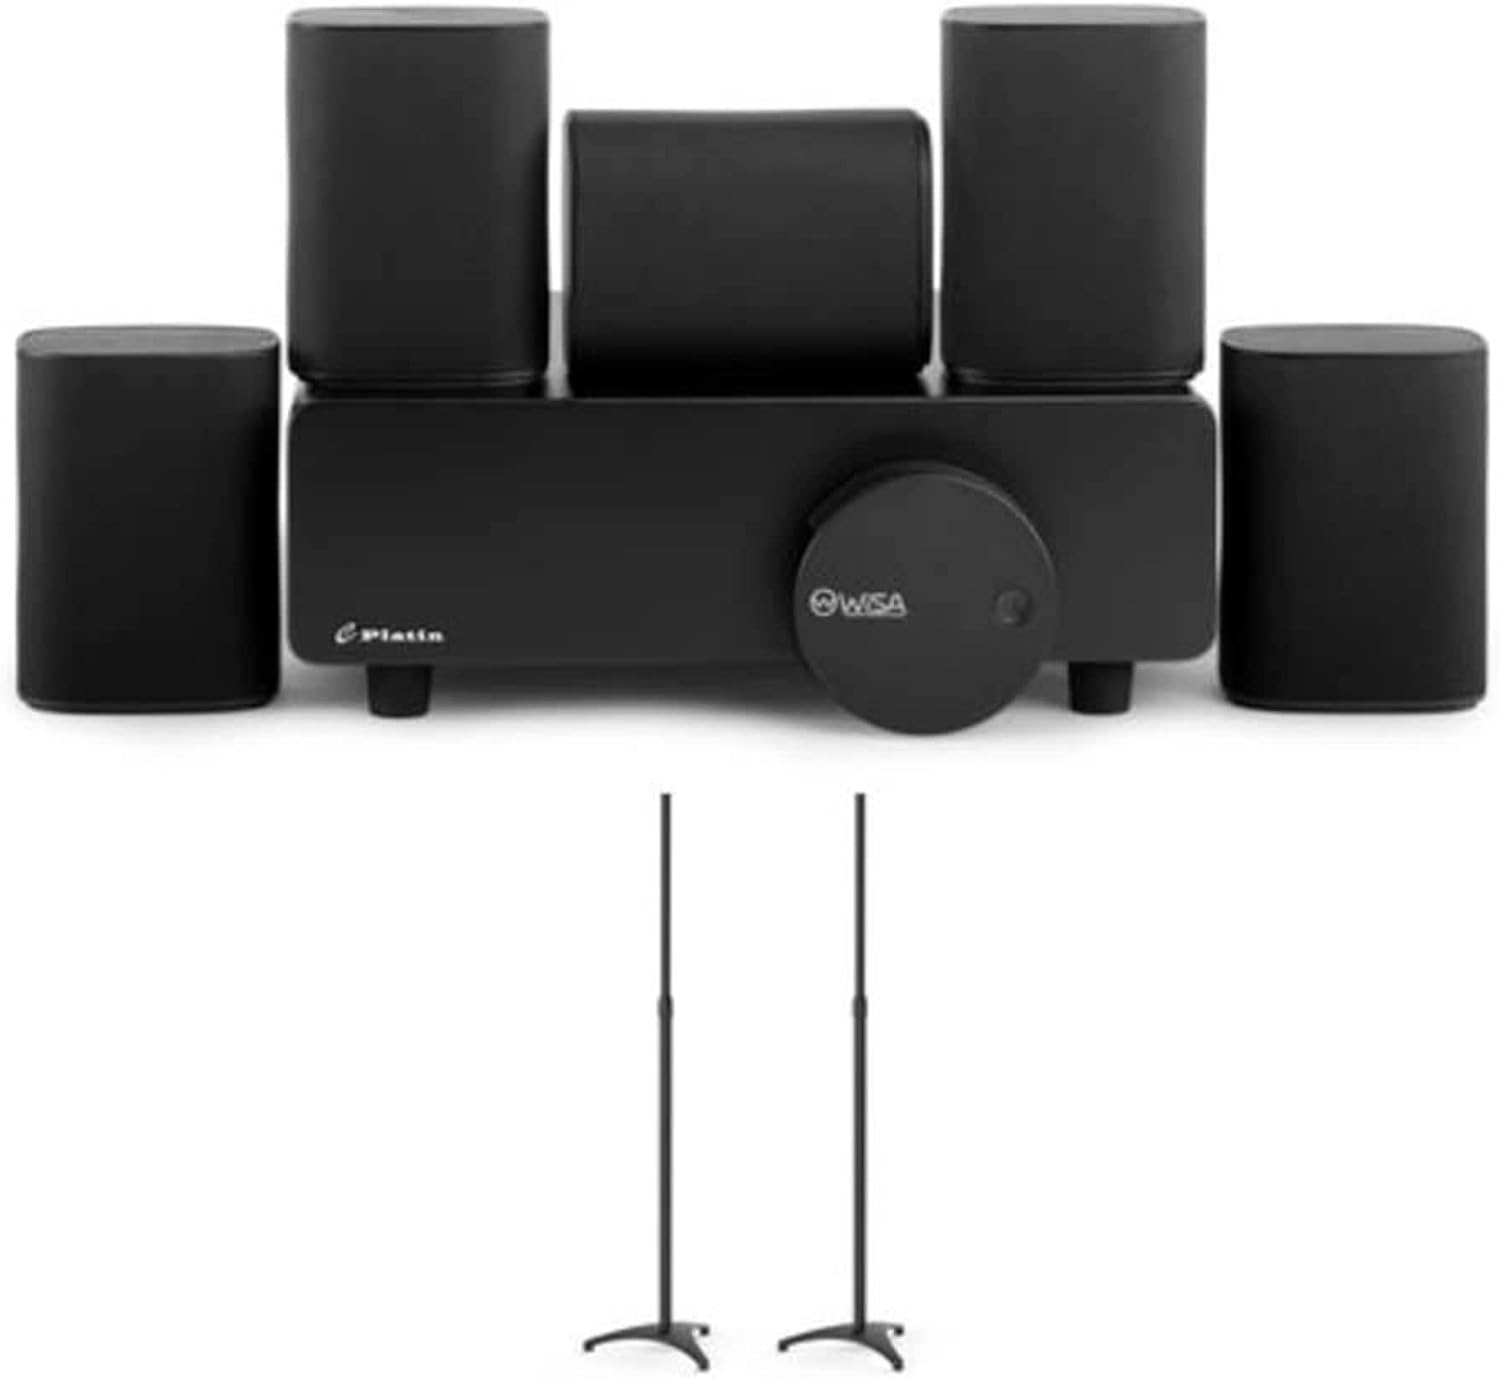 Platin Milan 5.1 Surround Sound System - Wireless Home Theater System for Smart TVs - WiSA Certified - with WiSA SoundSend Transmitter Included